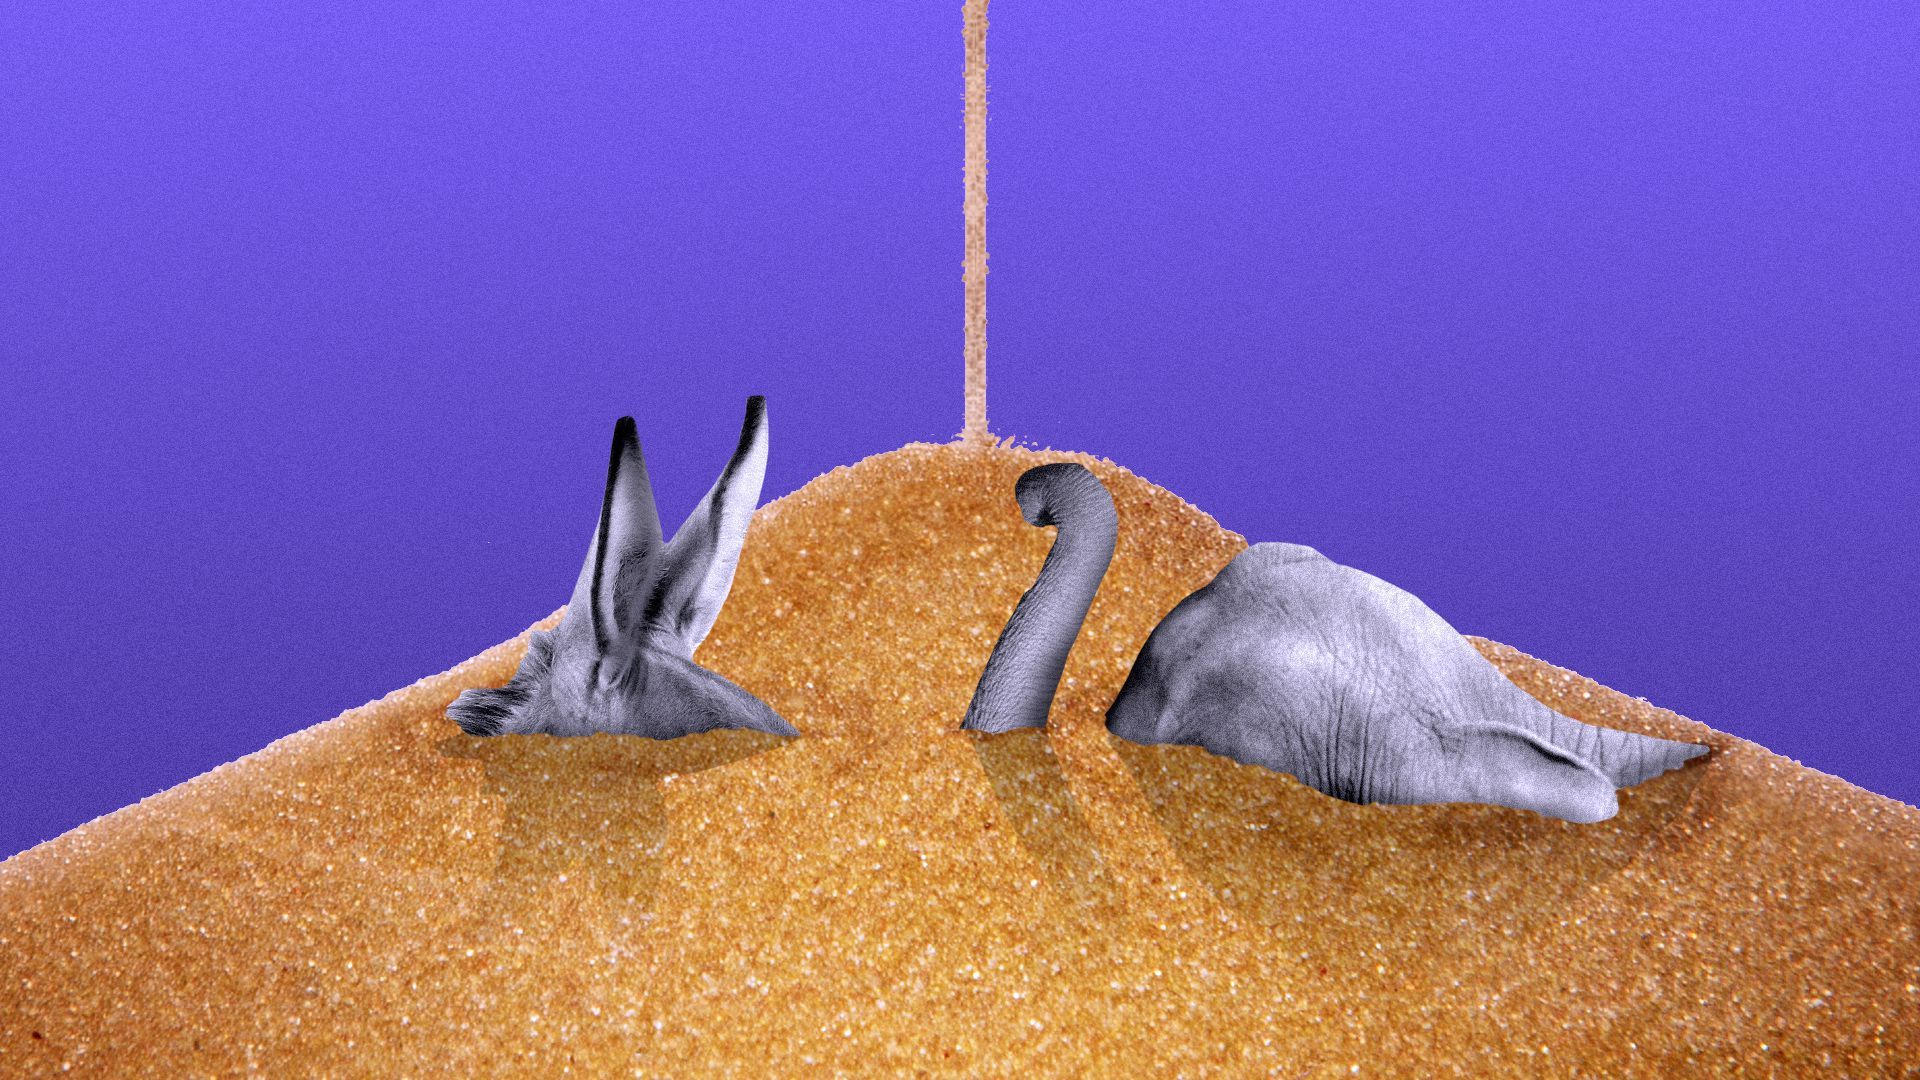 An illustration of a donkey and elephant under sand.